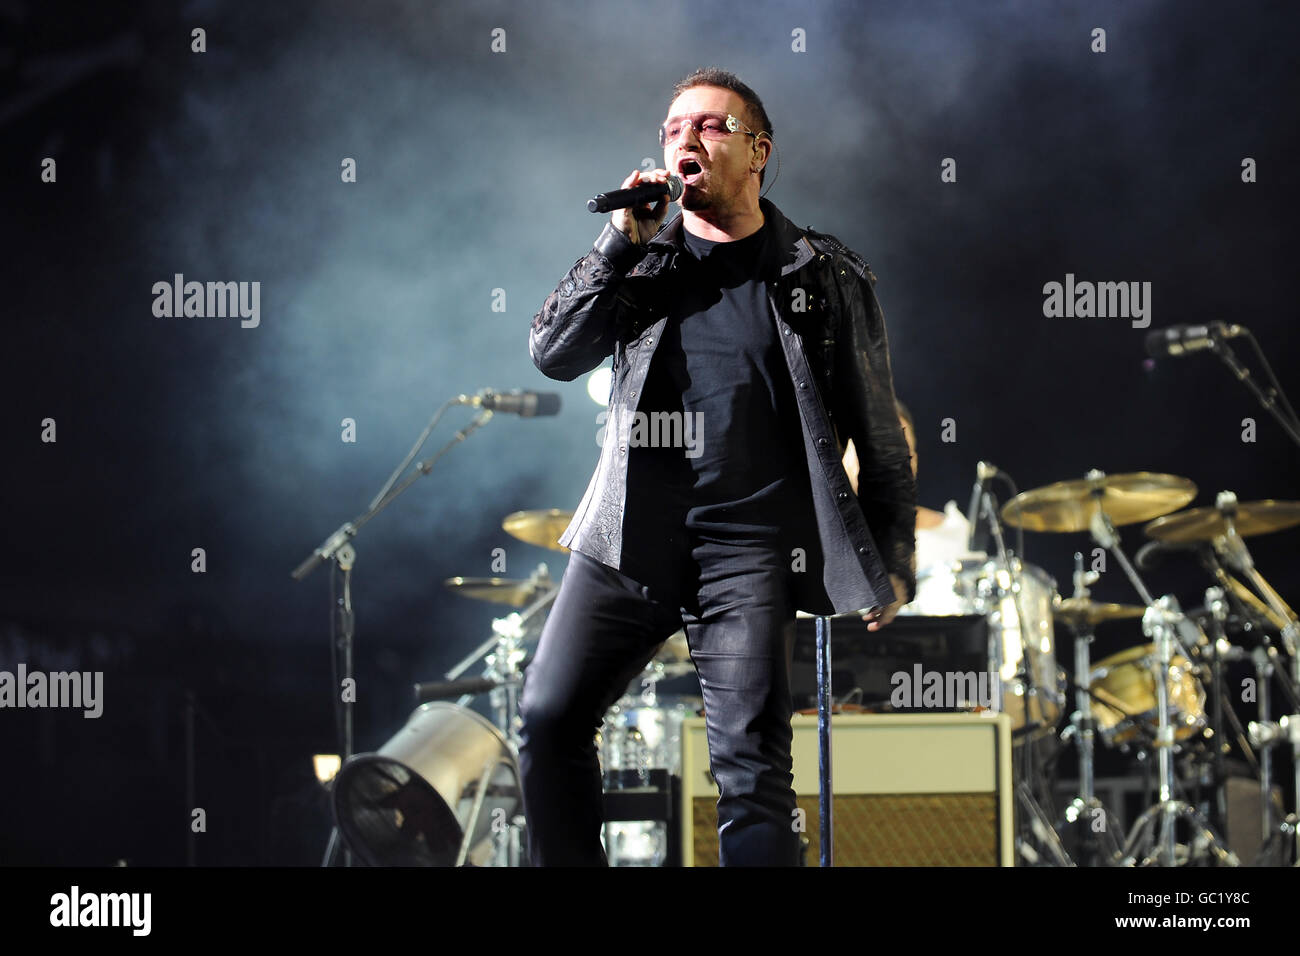 Bono of U2 performs at the Don Valley Stadium in Sheffield as part of their 360 Degree Tour. Stock Photo